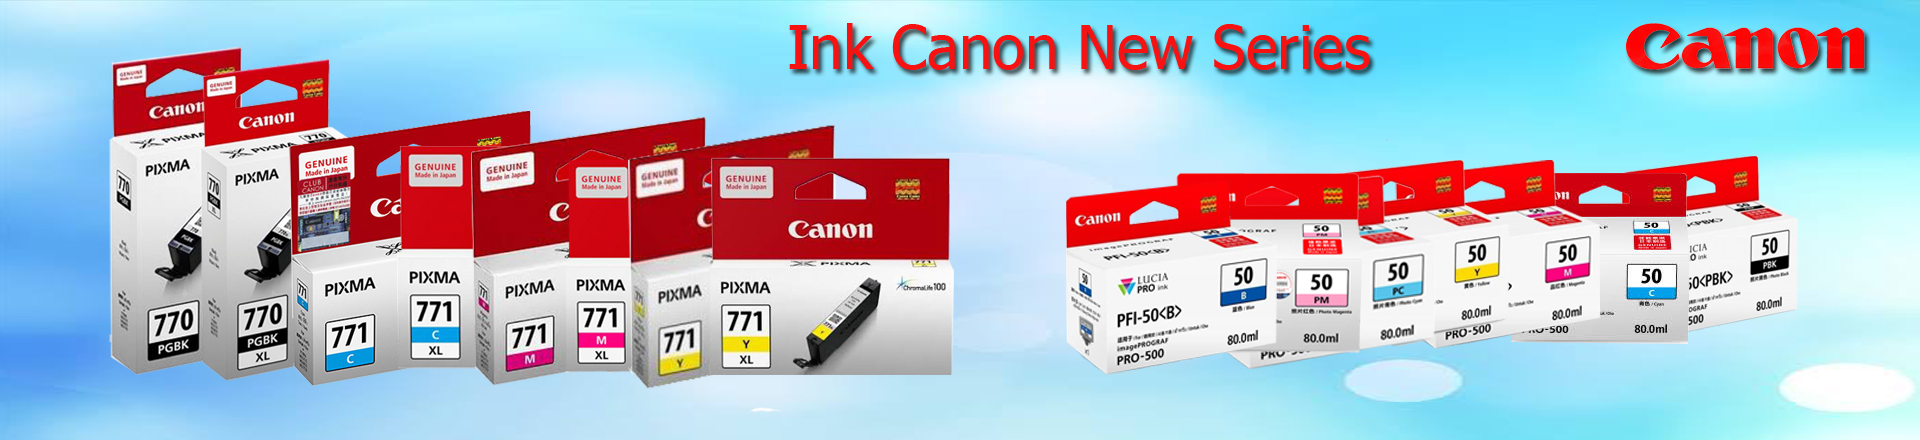 All New Ink Canon